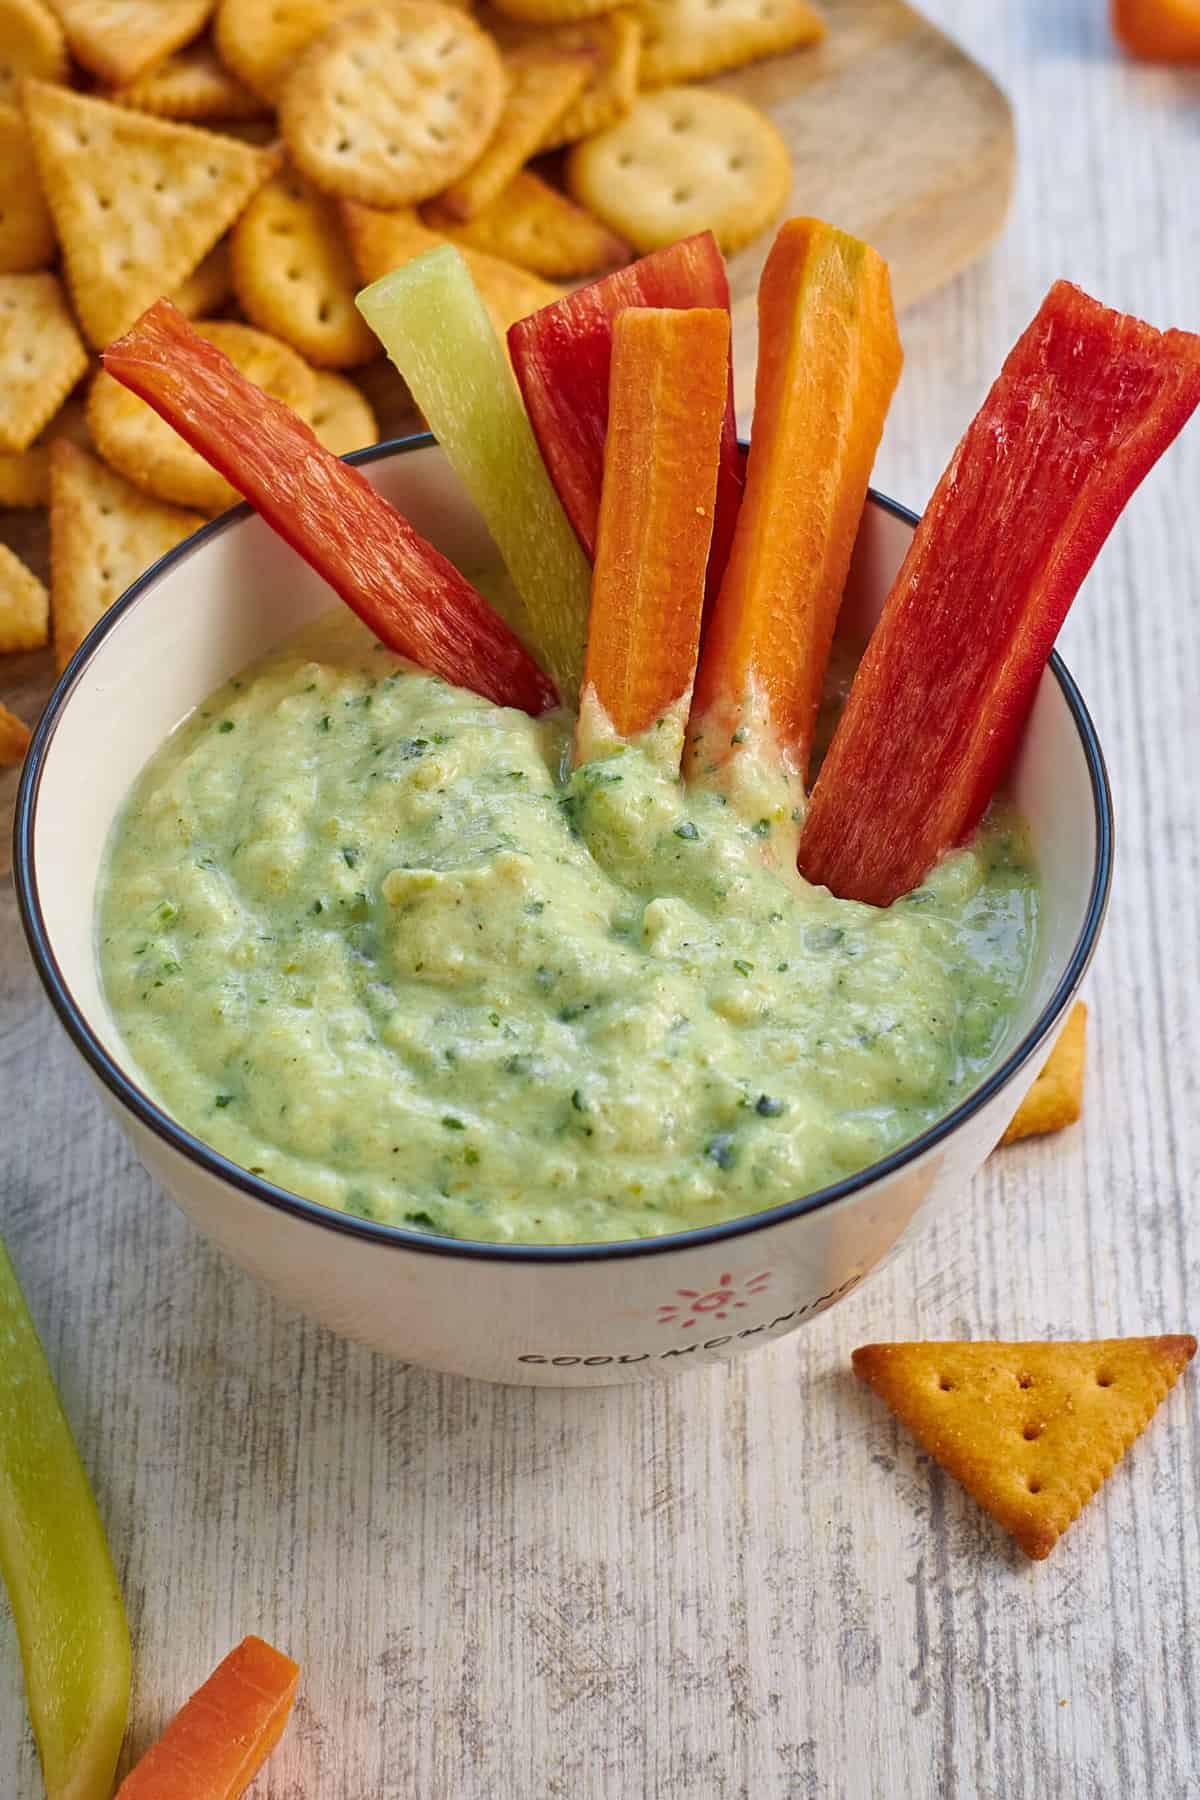 zucchini dip with carrot sticks and crackers.